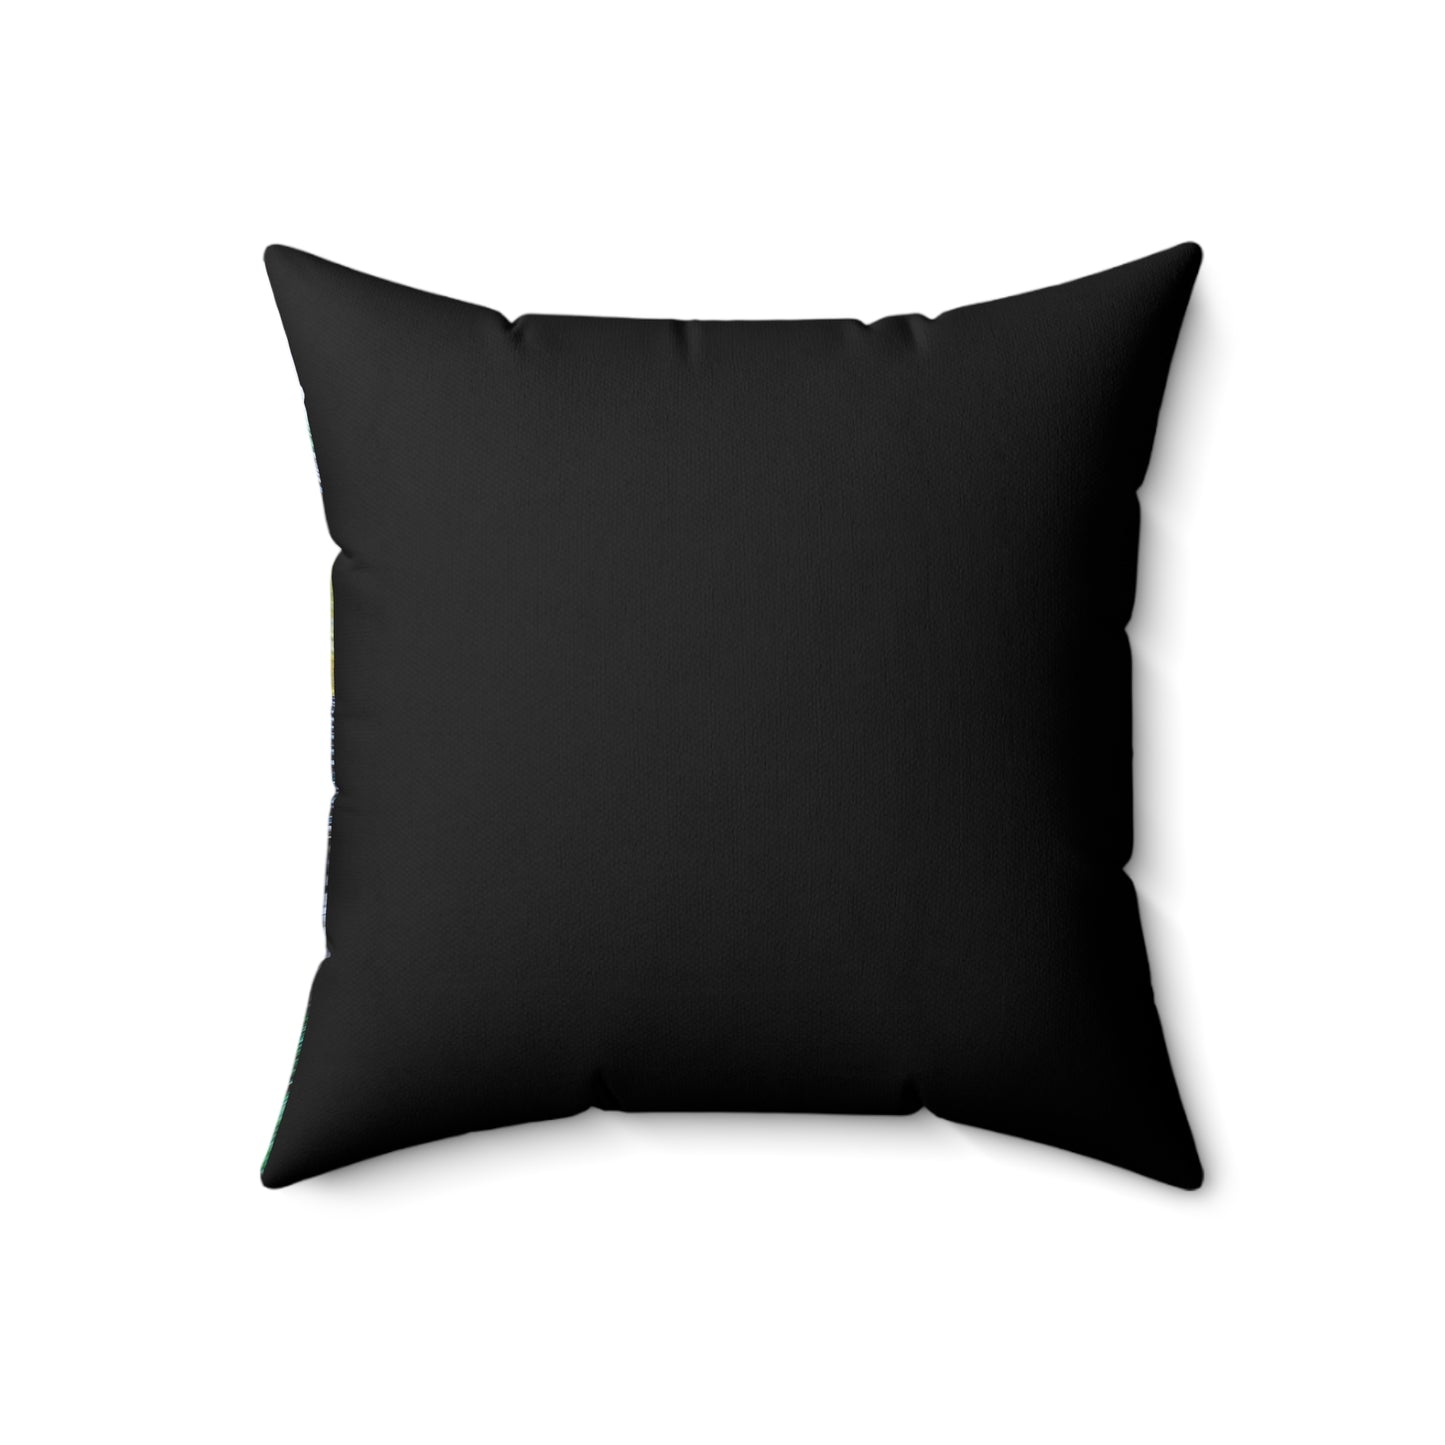 Polyester Square Pillow- Leith Waterway Walk Design